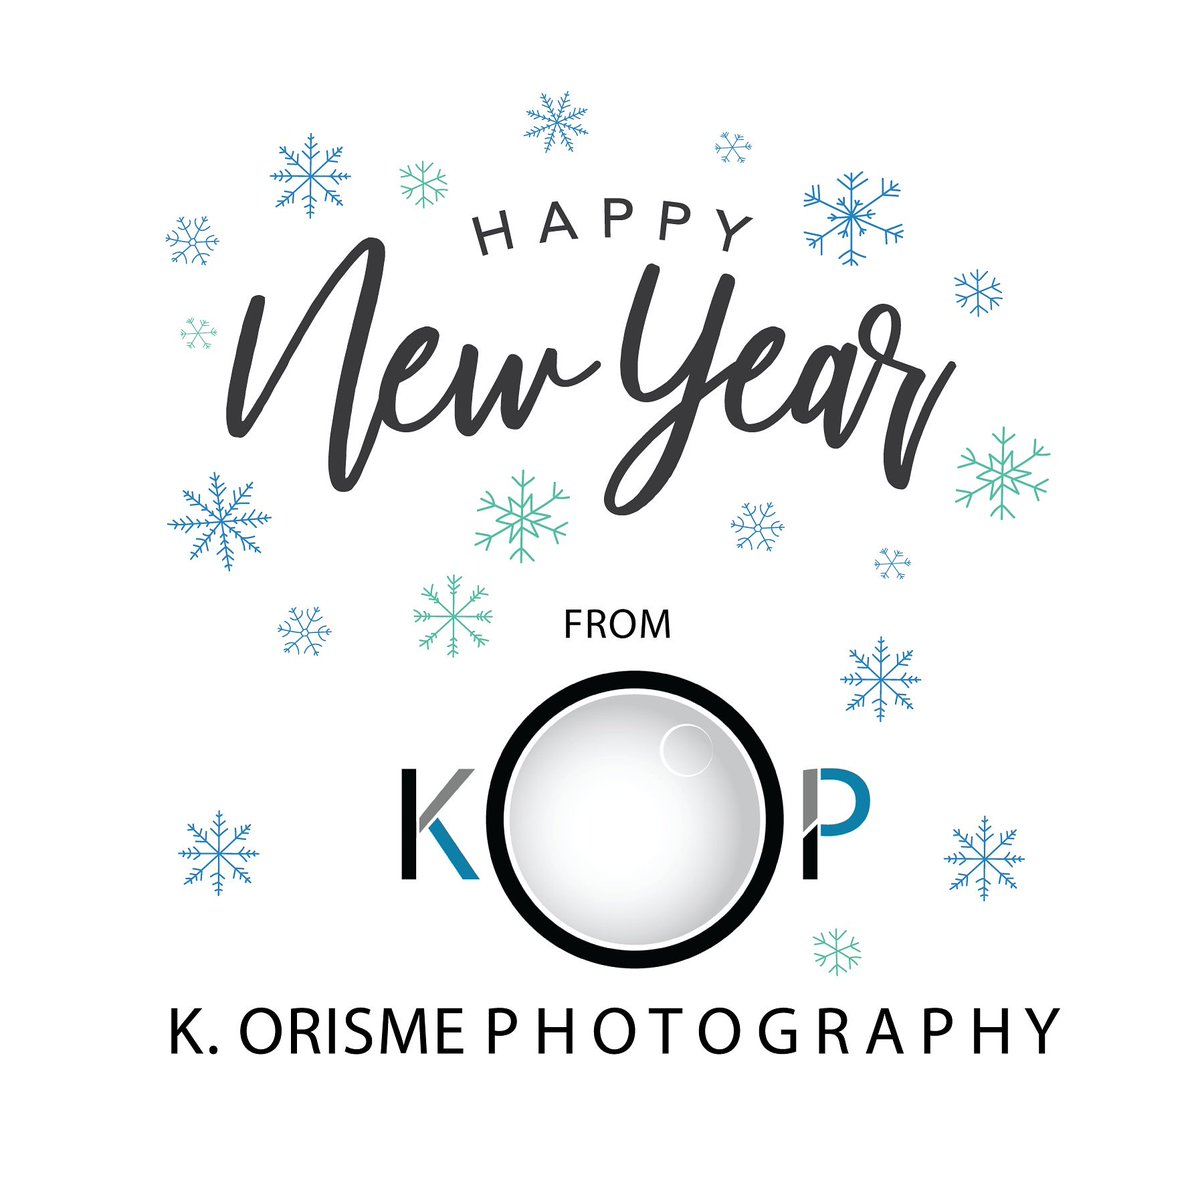 Happy New Year from K. Orisme Photography! Thank you for supporting us through 2018. Lookout for more exciting things in 2019! 
.
.
.
#Newyear #Newyearseve #Newyears #Newyearsresolution #Newyears2018 #2019 #Goodbye2018 #Hello2019 #Happynewyear #Happynewyears #Happynewyearseve